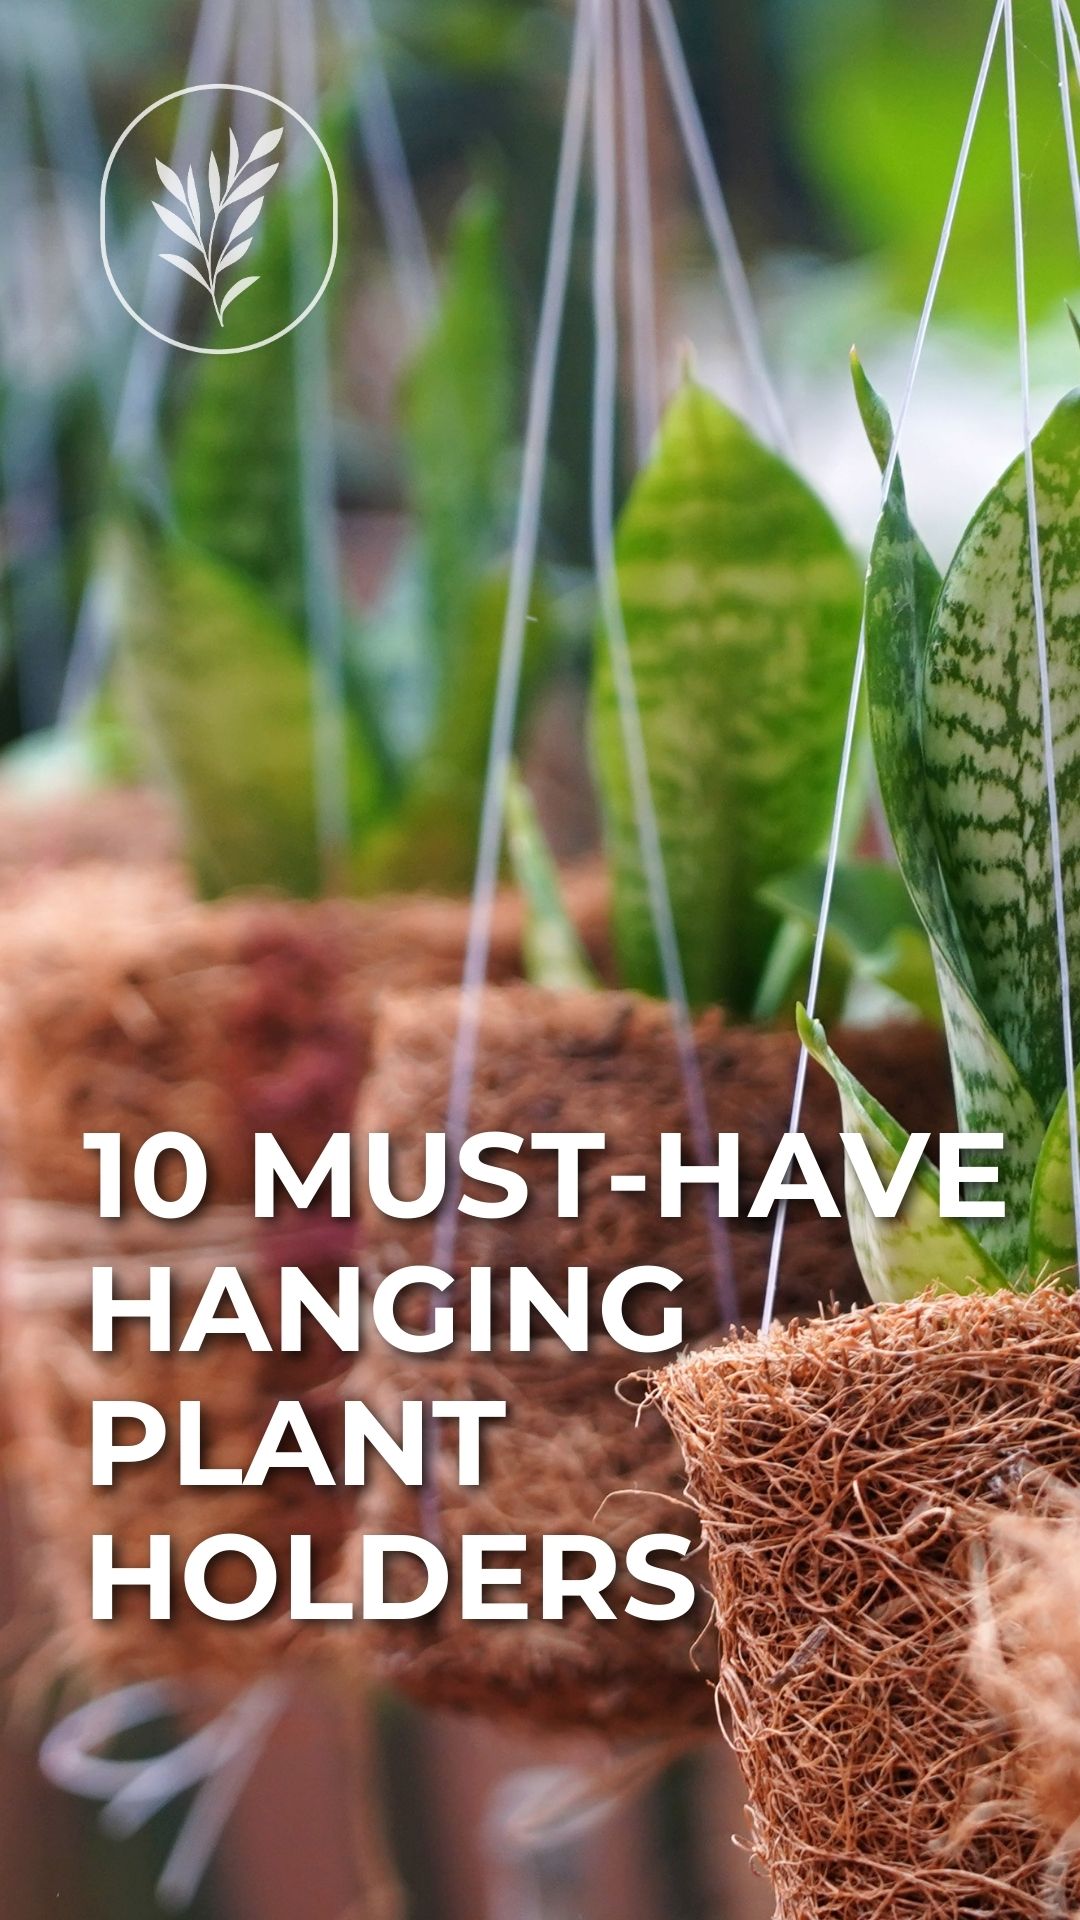 10 must-have hanging plant holders via @home4theharvest